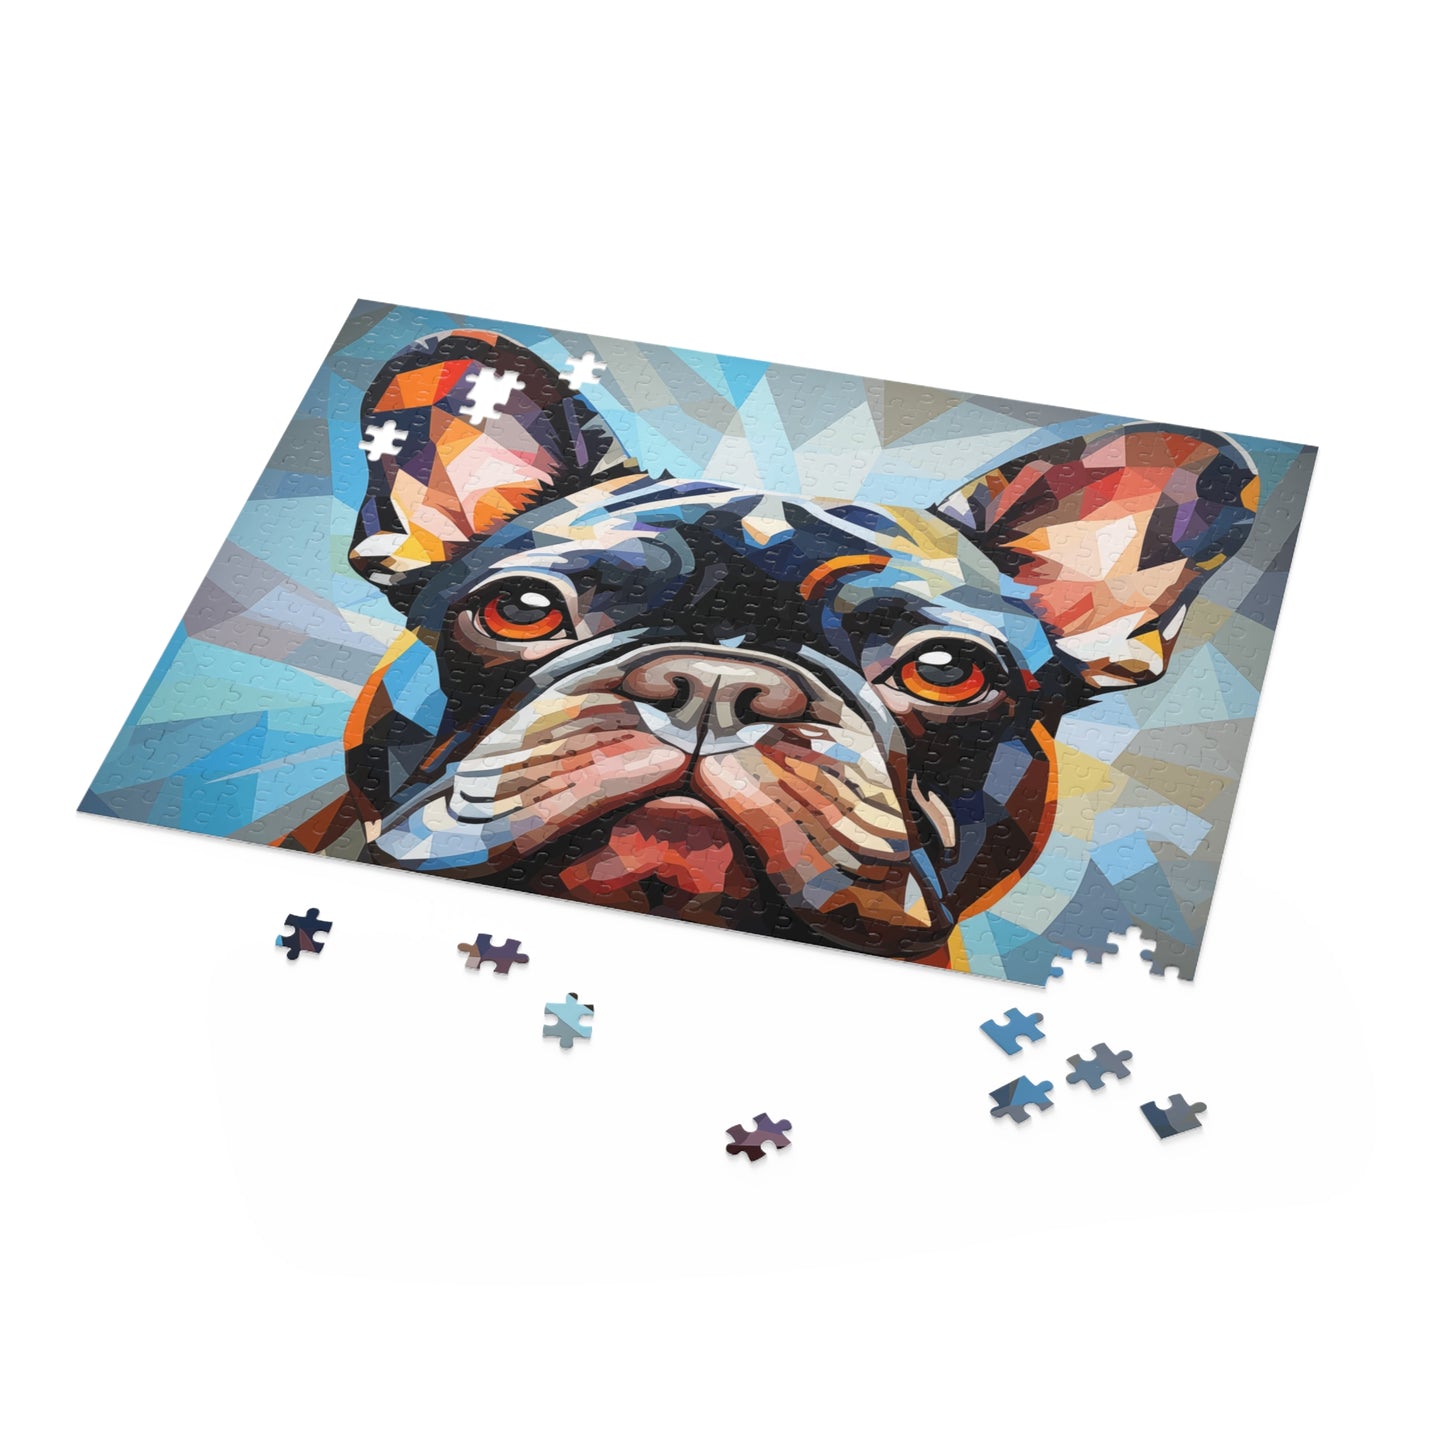 Frenchie Vibrant Abstract Jigsaw Dog Puzzle Oil Paint Adult Birthday Business Jigsaw Puzzle Gift for Him Funny Humorous Indoor Outdoor Game Gift For Her Online-5